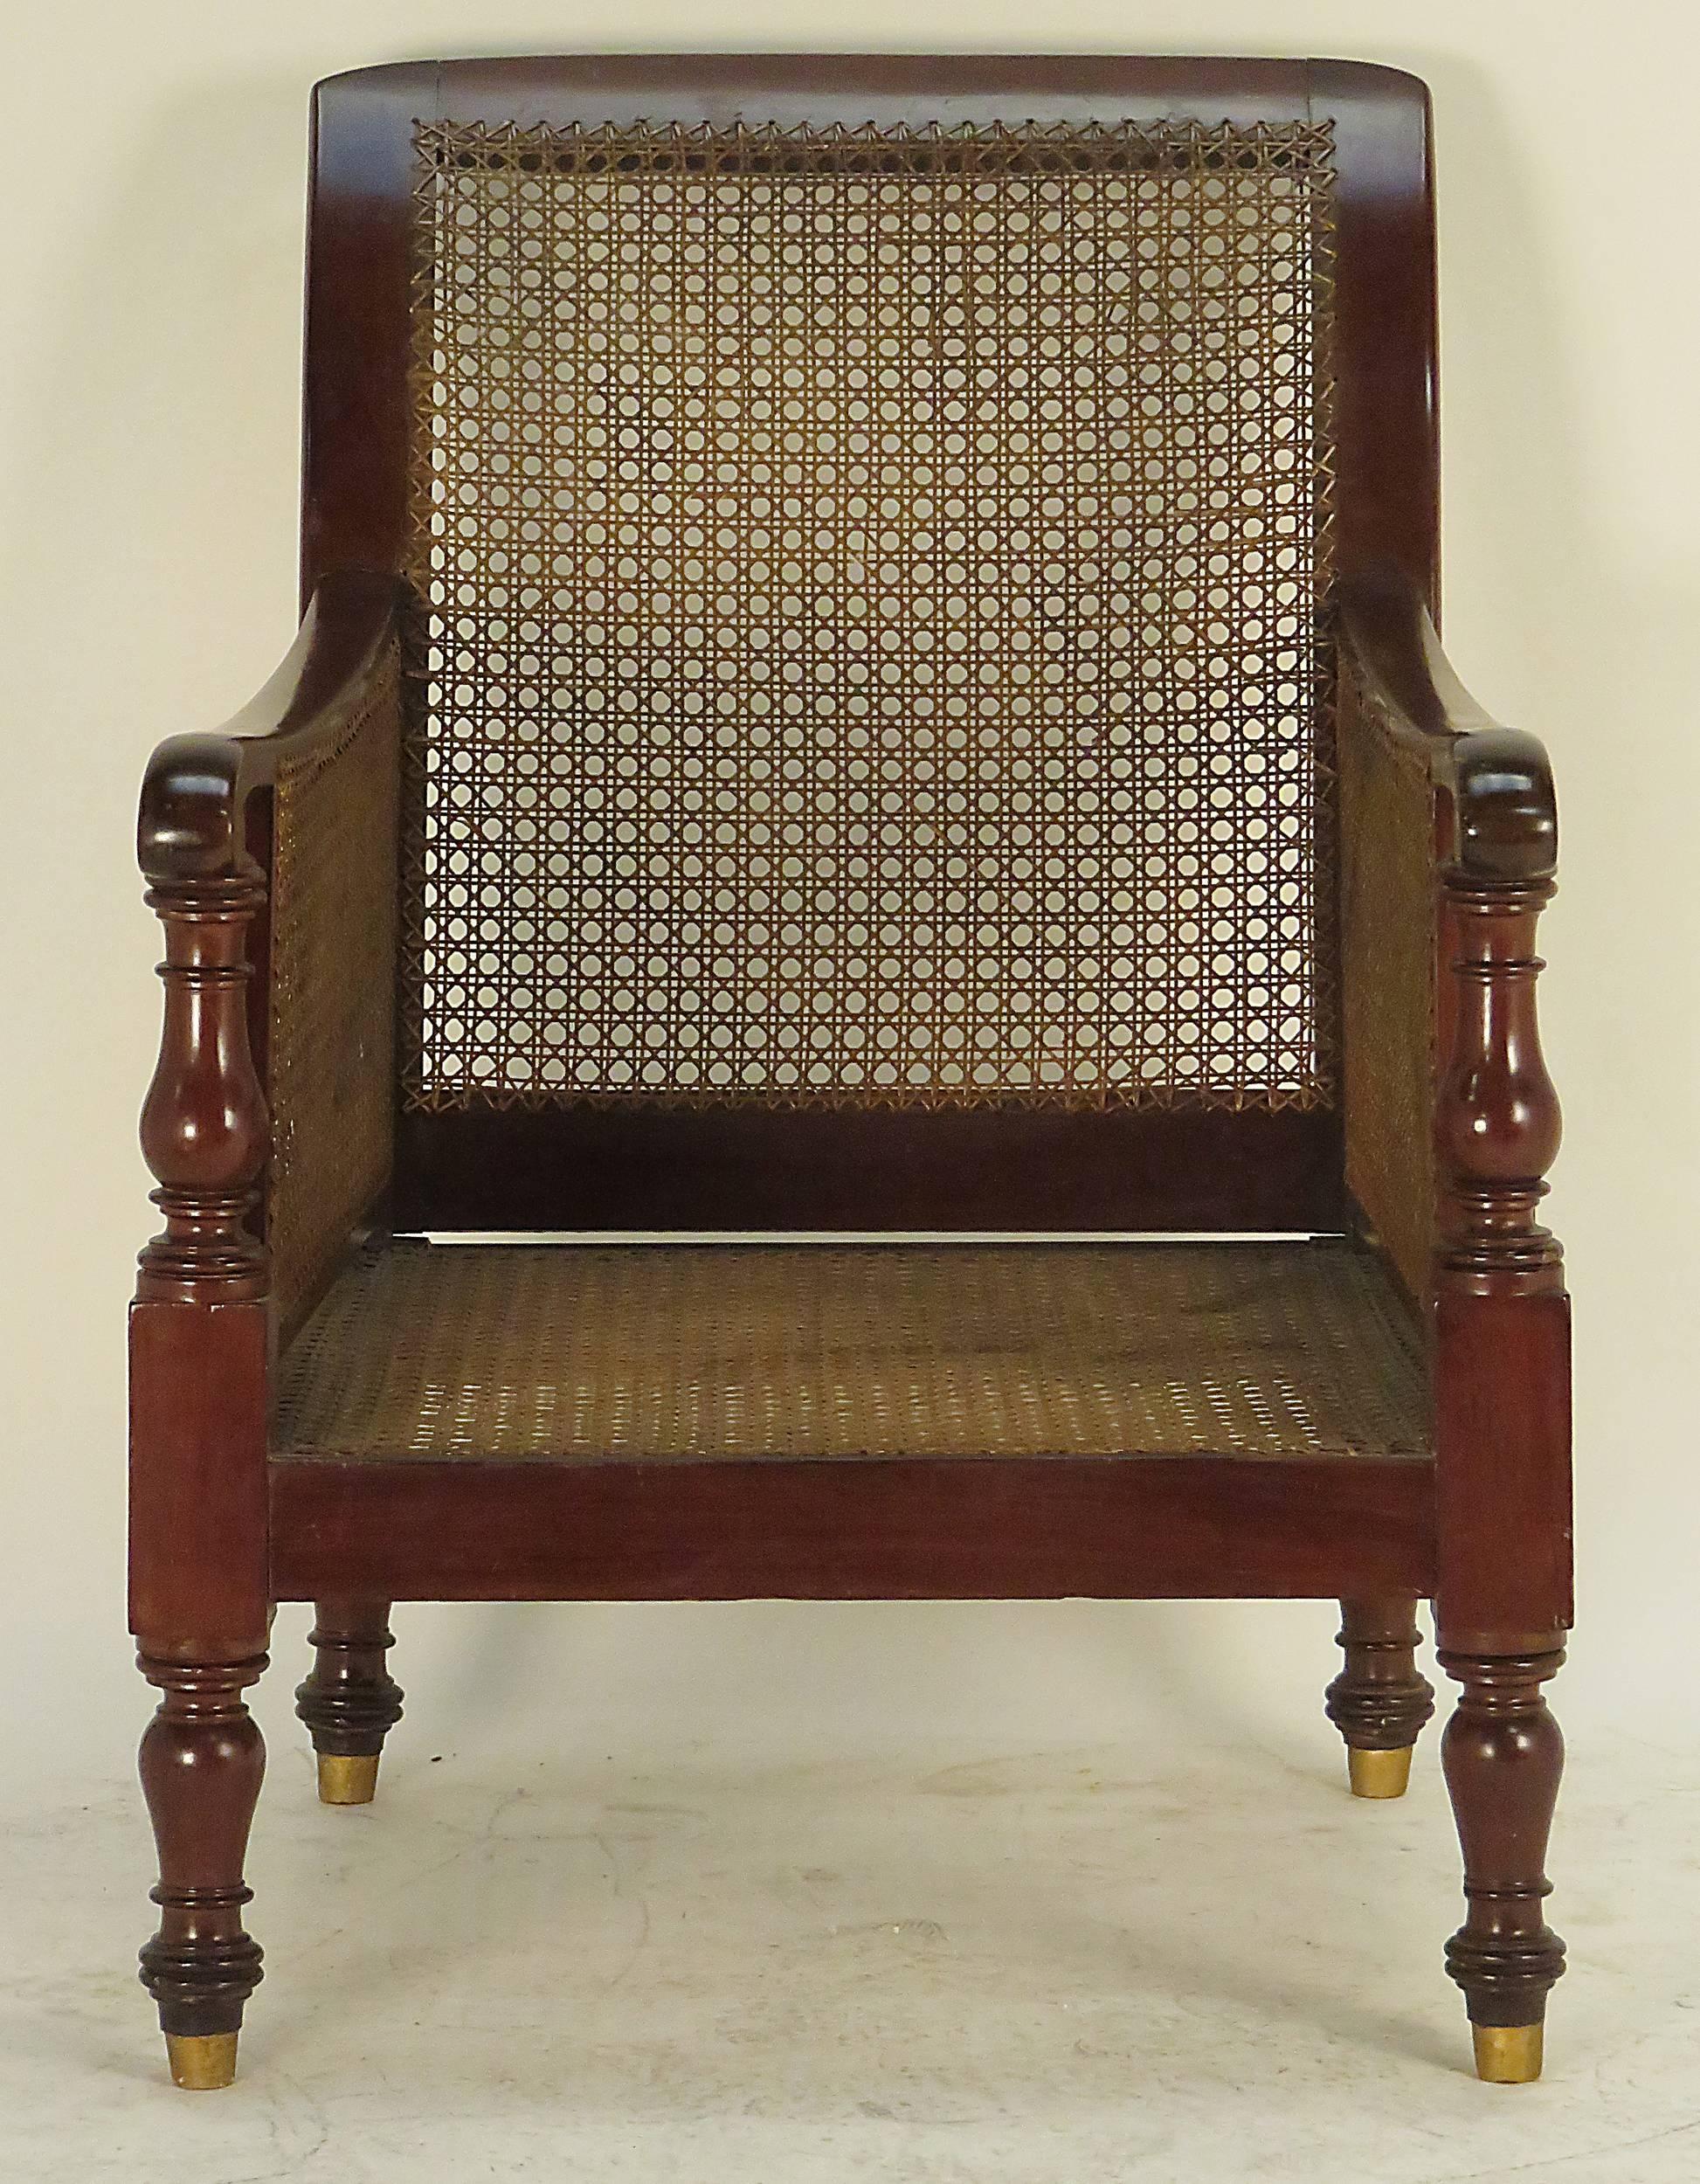 We love the large-scale of this English library / reading chair made about the turn of the last century. This design is inspired by pieces first made circa 1790 that remained popular through the 1830s. We wonder if the chair originally had casters.